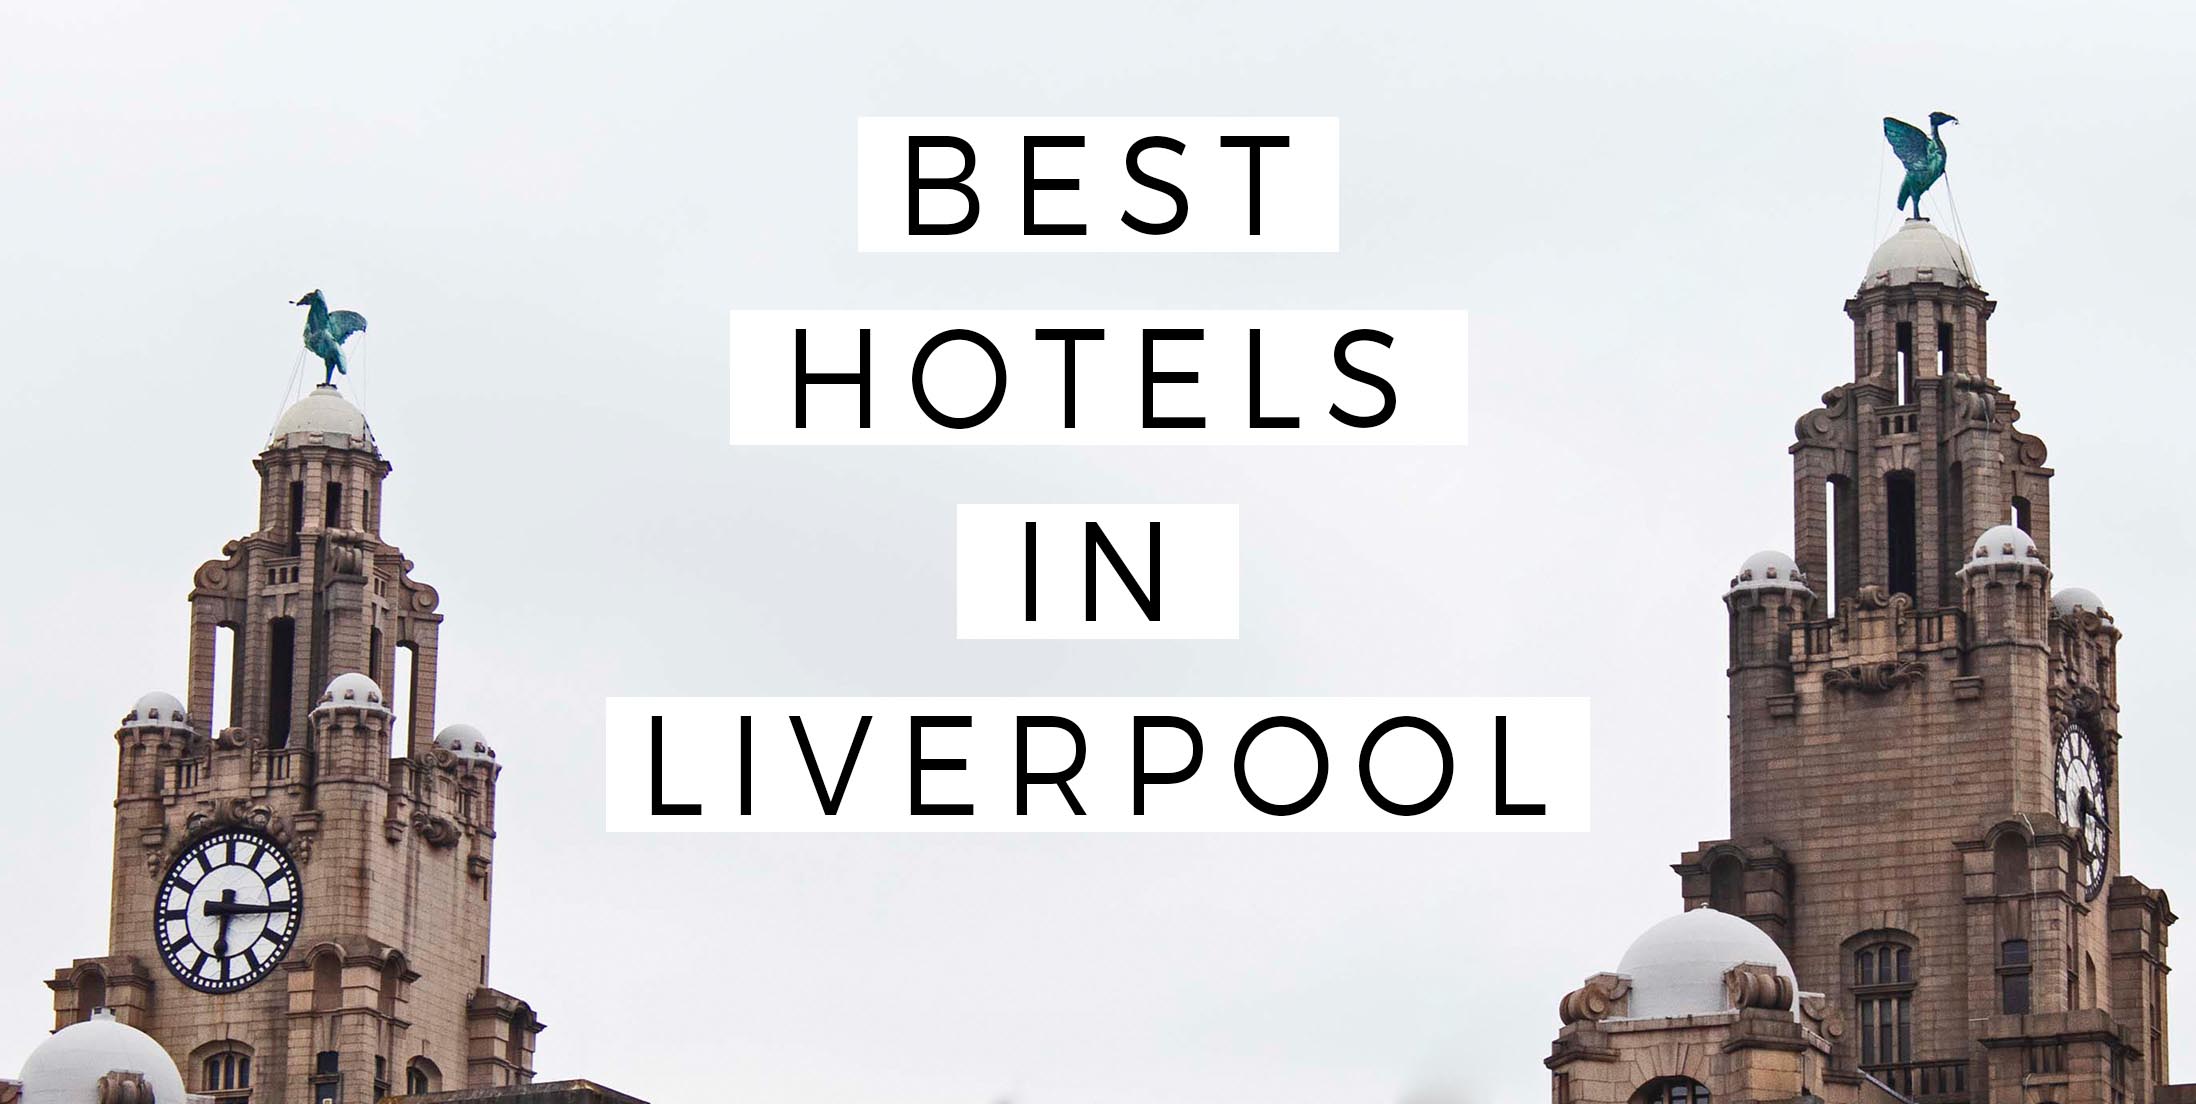 Best Hotels in Liverpool